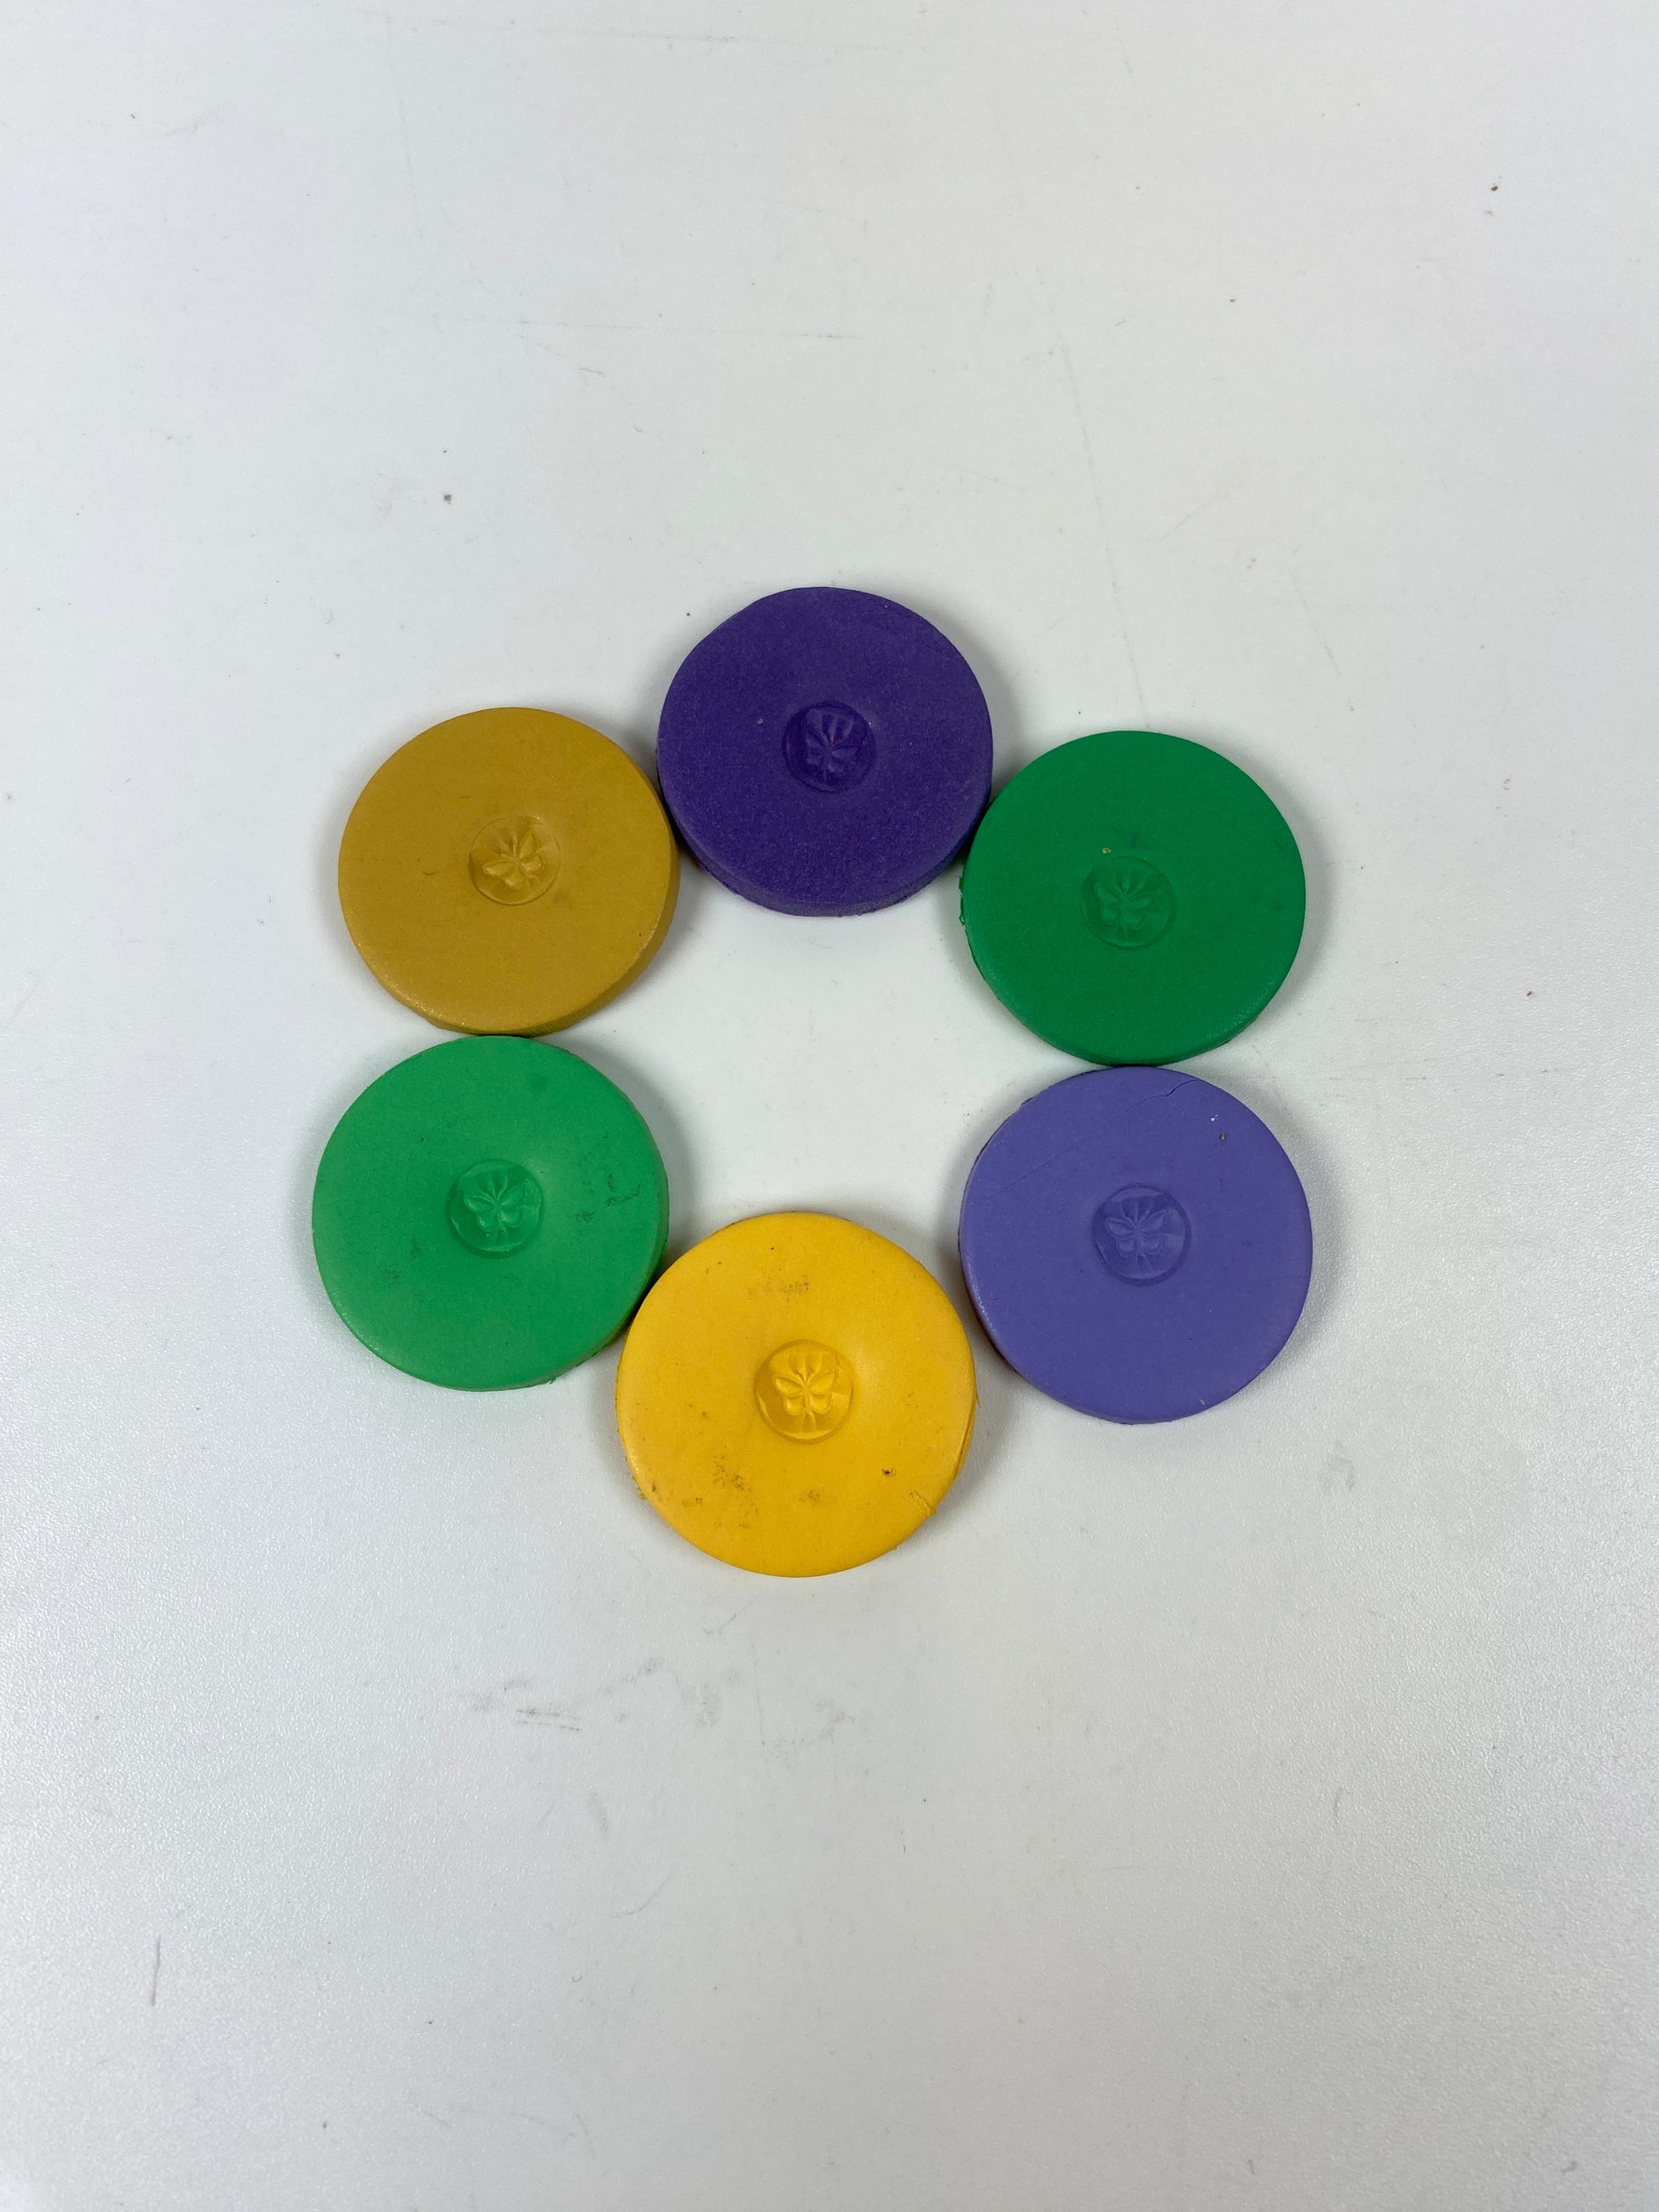 Discs of Polymer Clay in all 6 Mardi Gras colors of this palette, arranged in a ring.